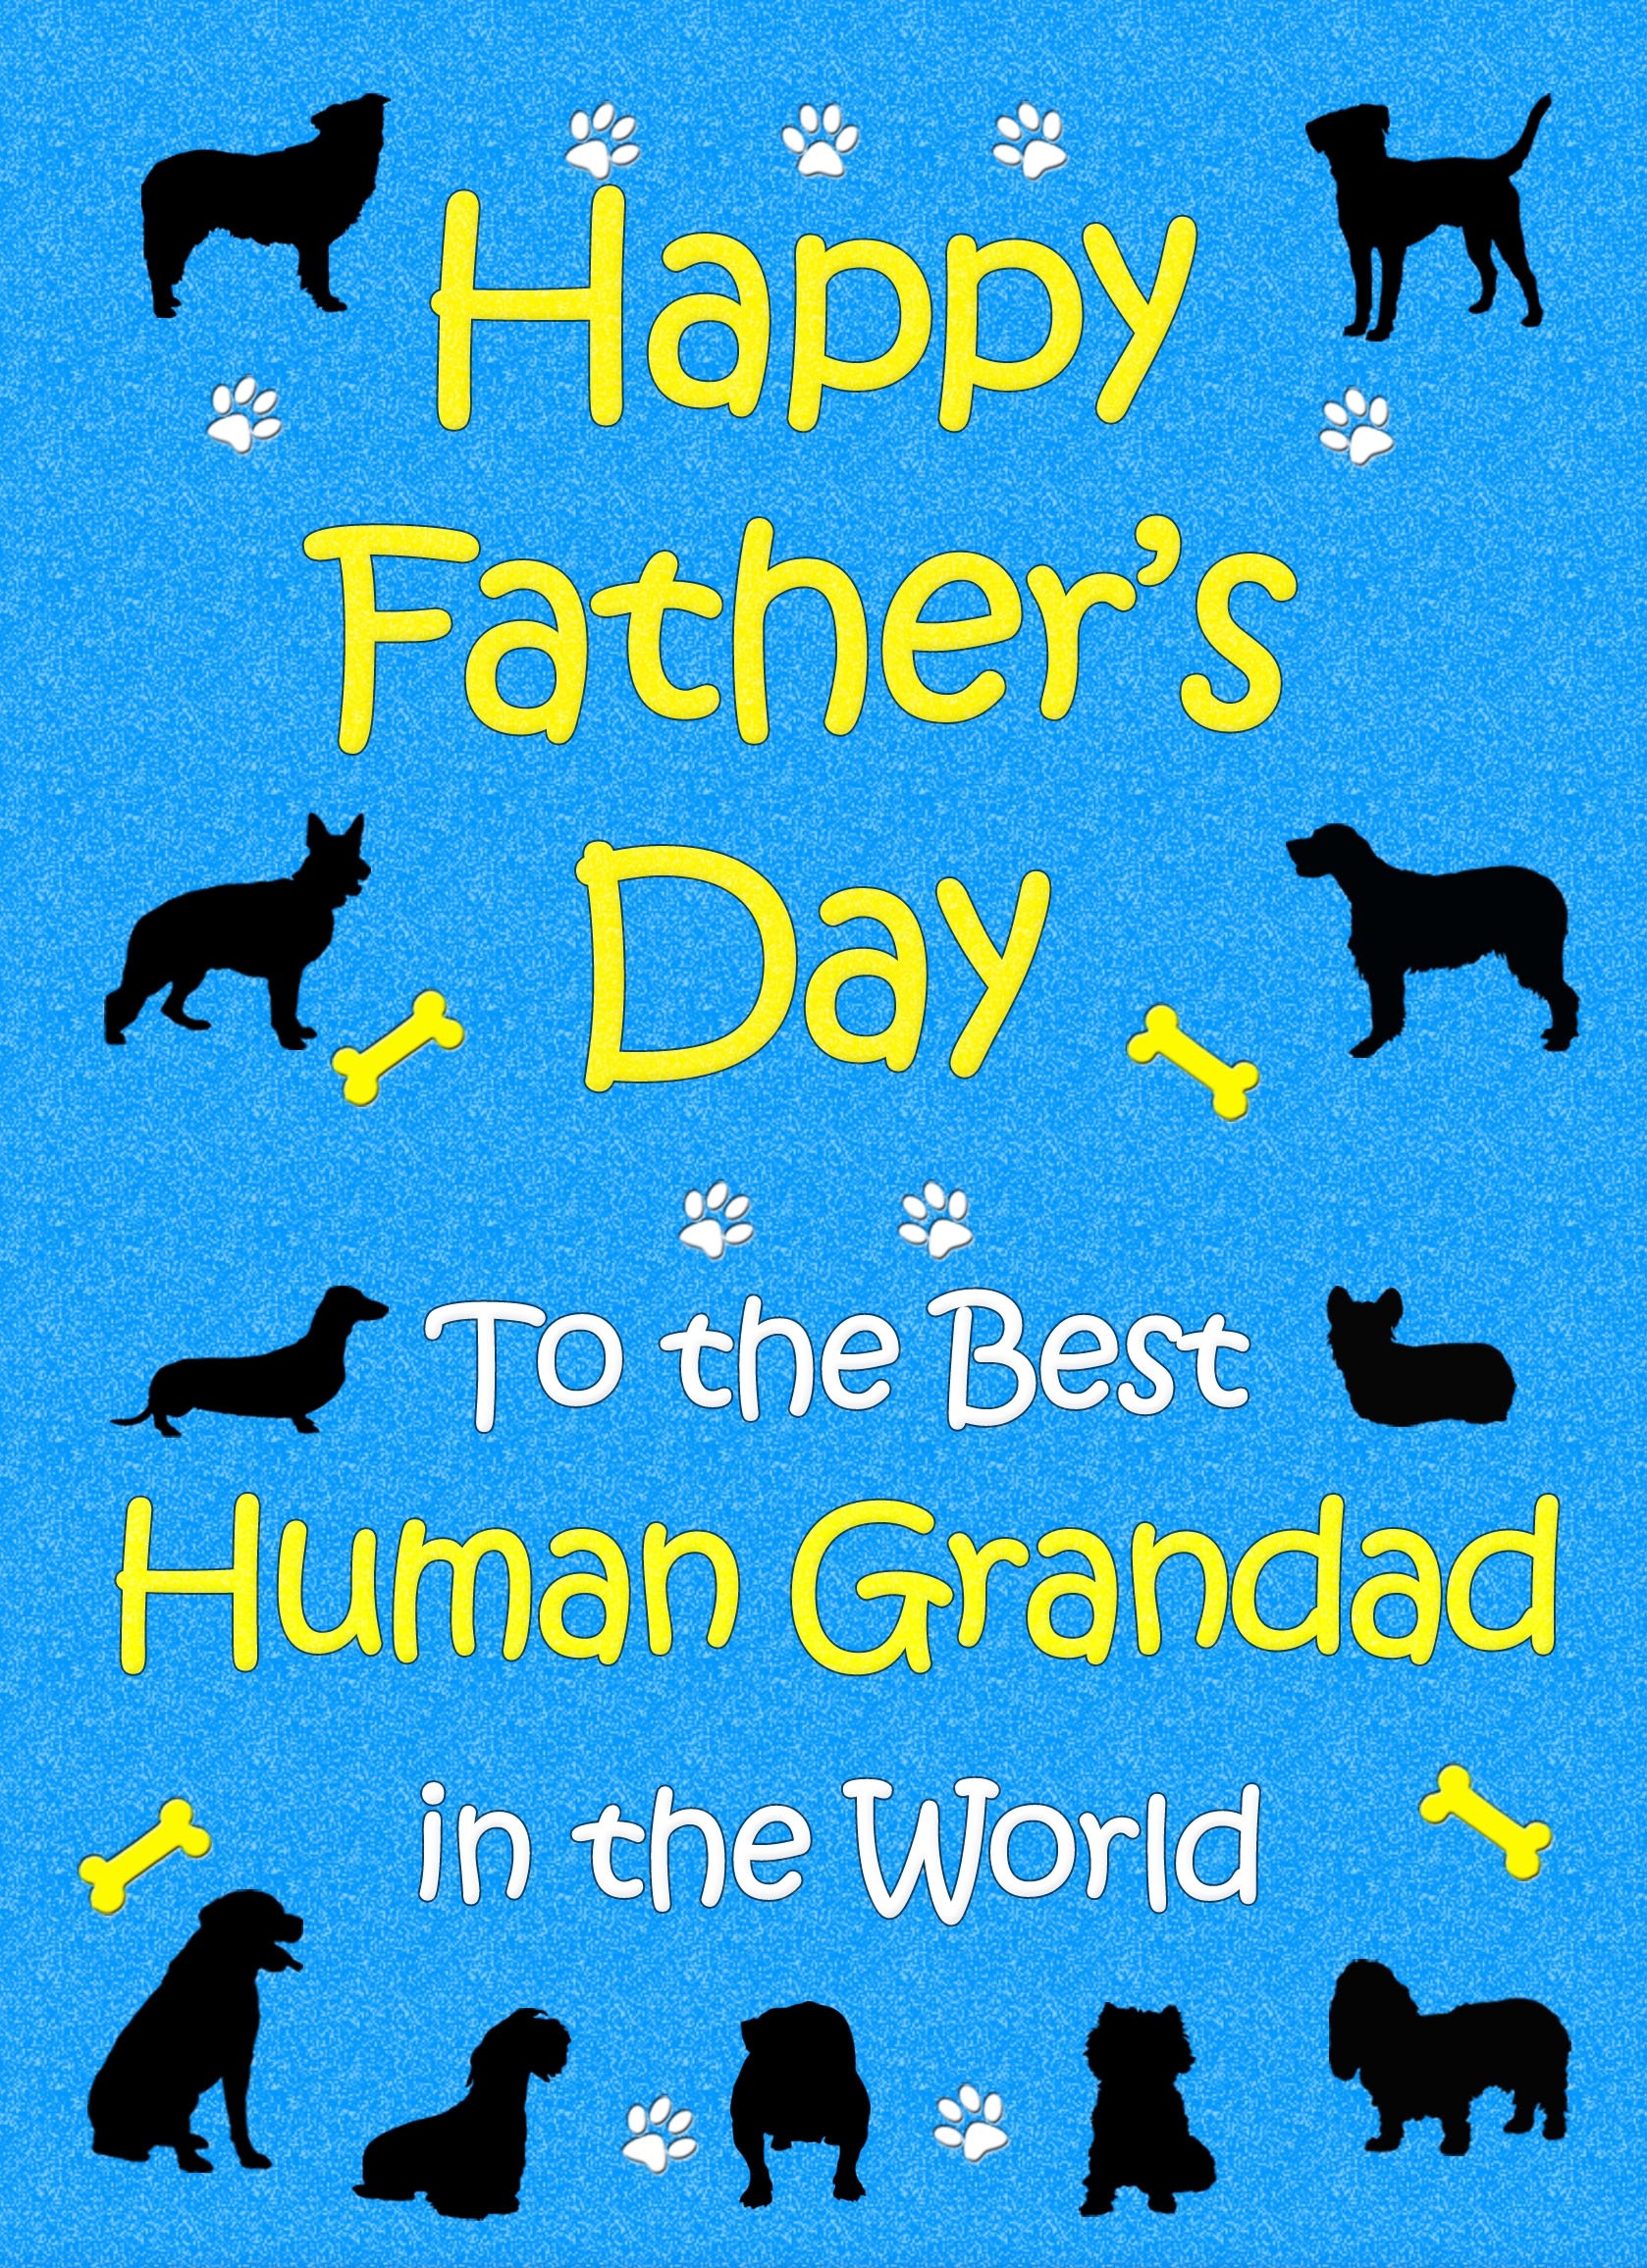 From The Dog Fathers Day Card (Blue, Human Grandad)